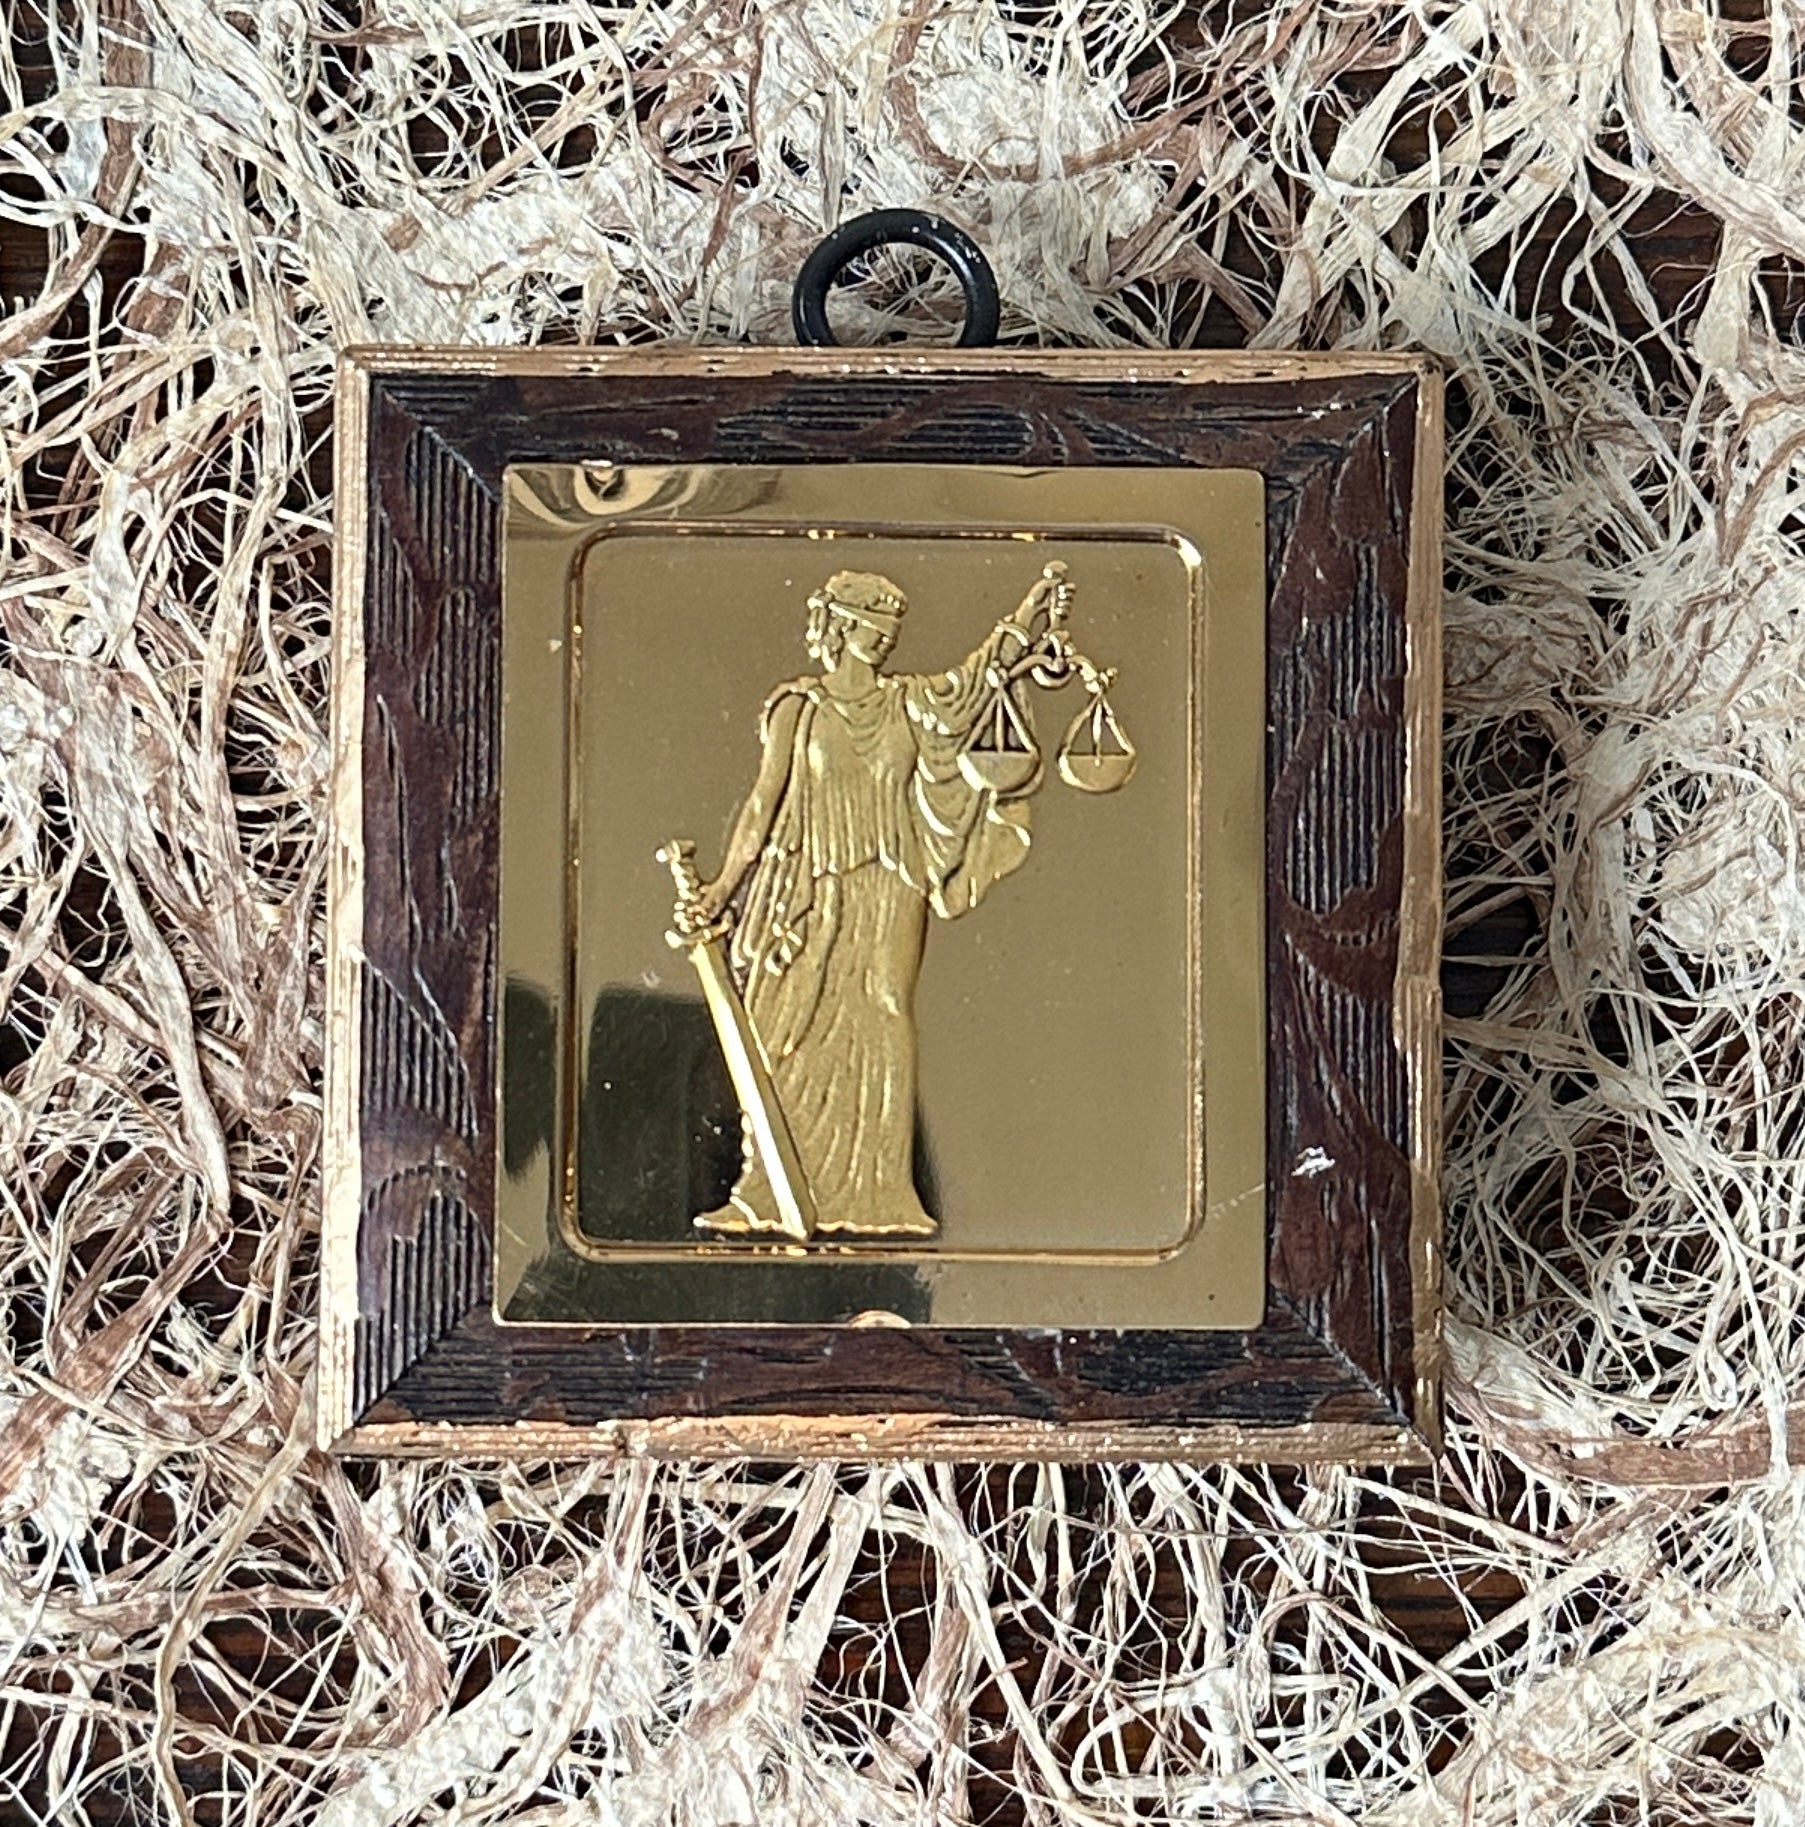 Museum Bee, Wooden Frame with Lady Justice